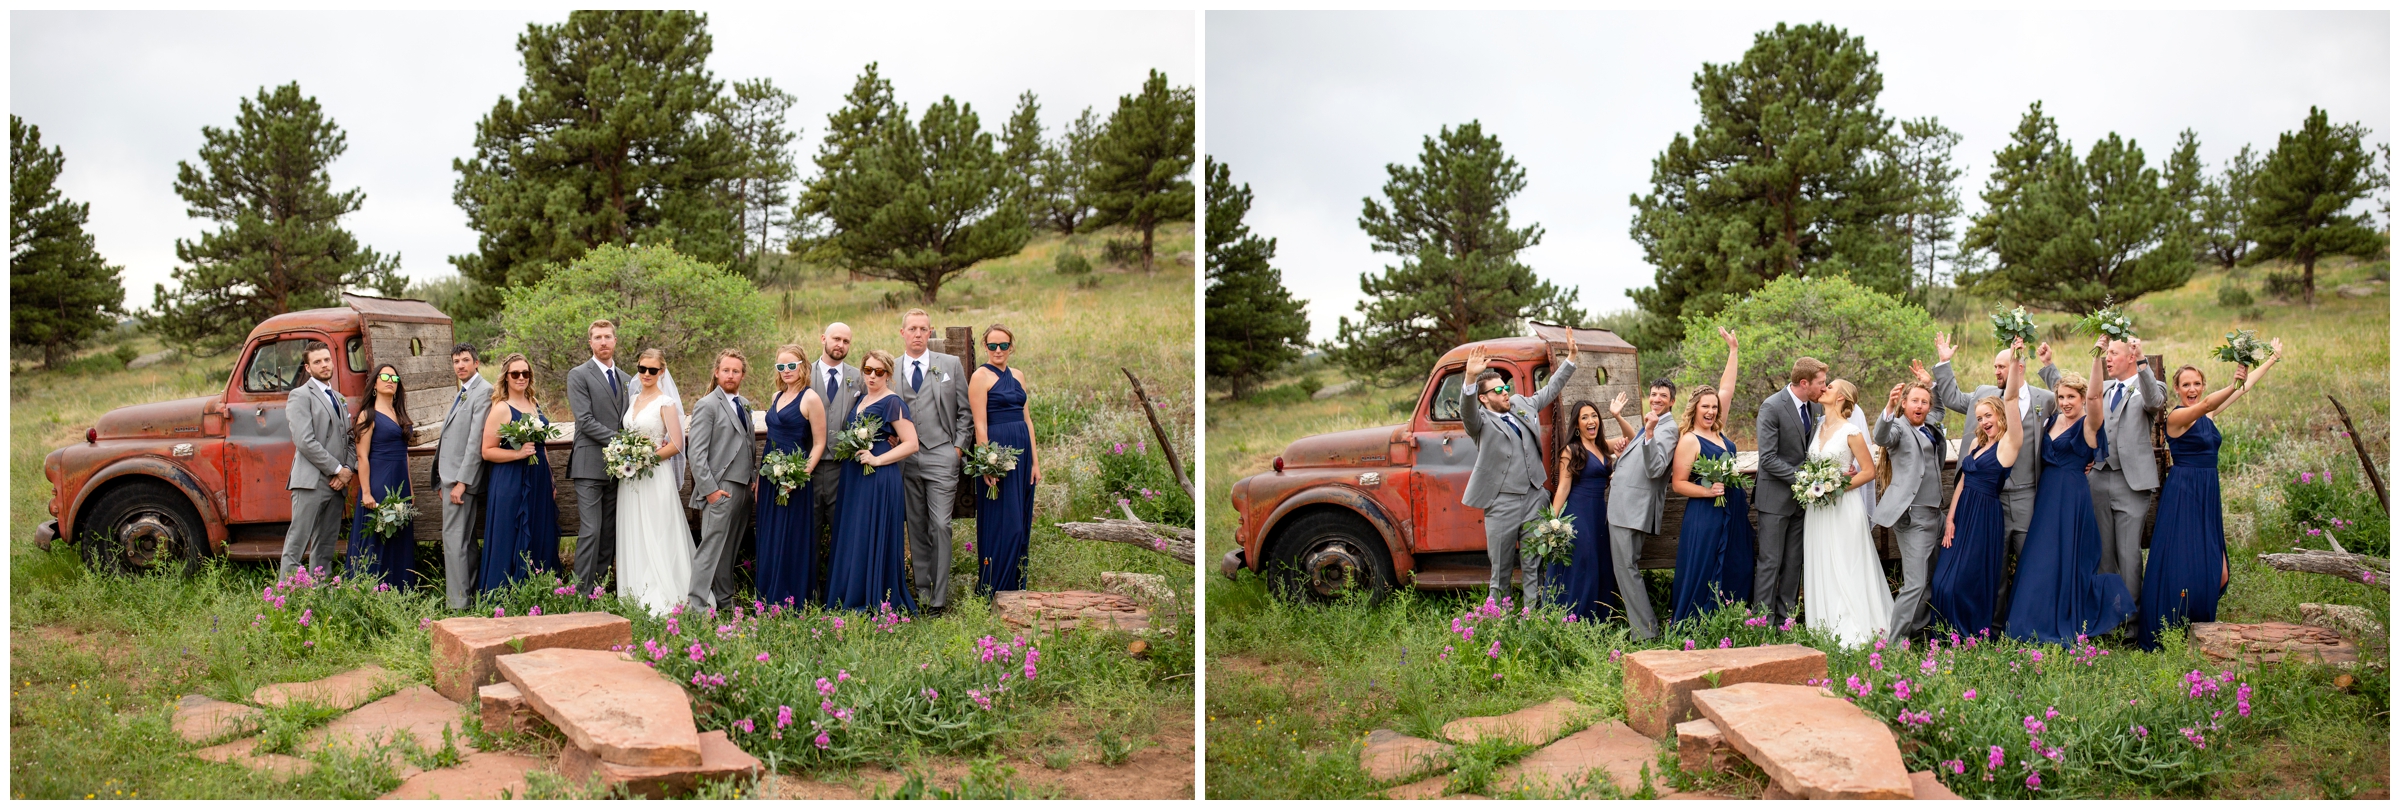 wedding party in gray and navy blue posing in front of vintage truck in Colorado mountains 